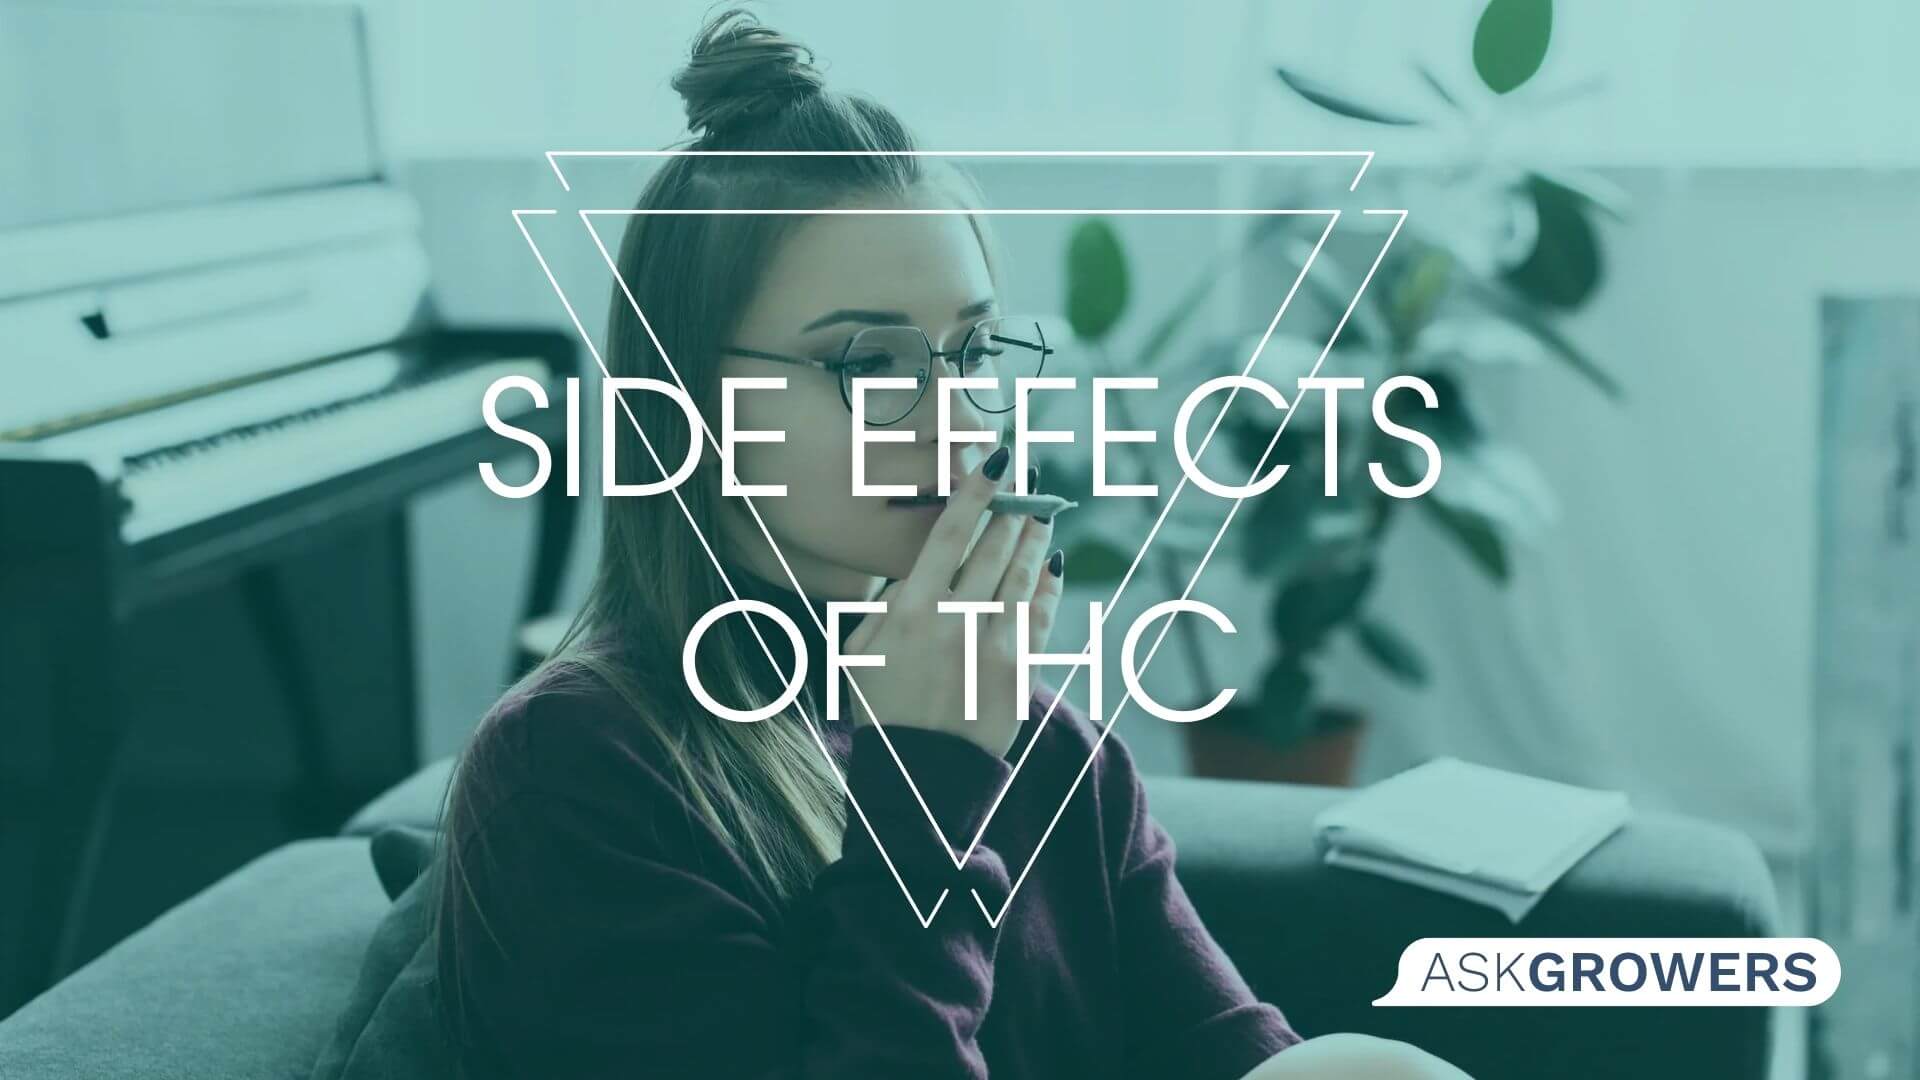 What Are the Possible Side Effects of THC or Cannabis Use?